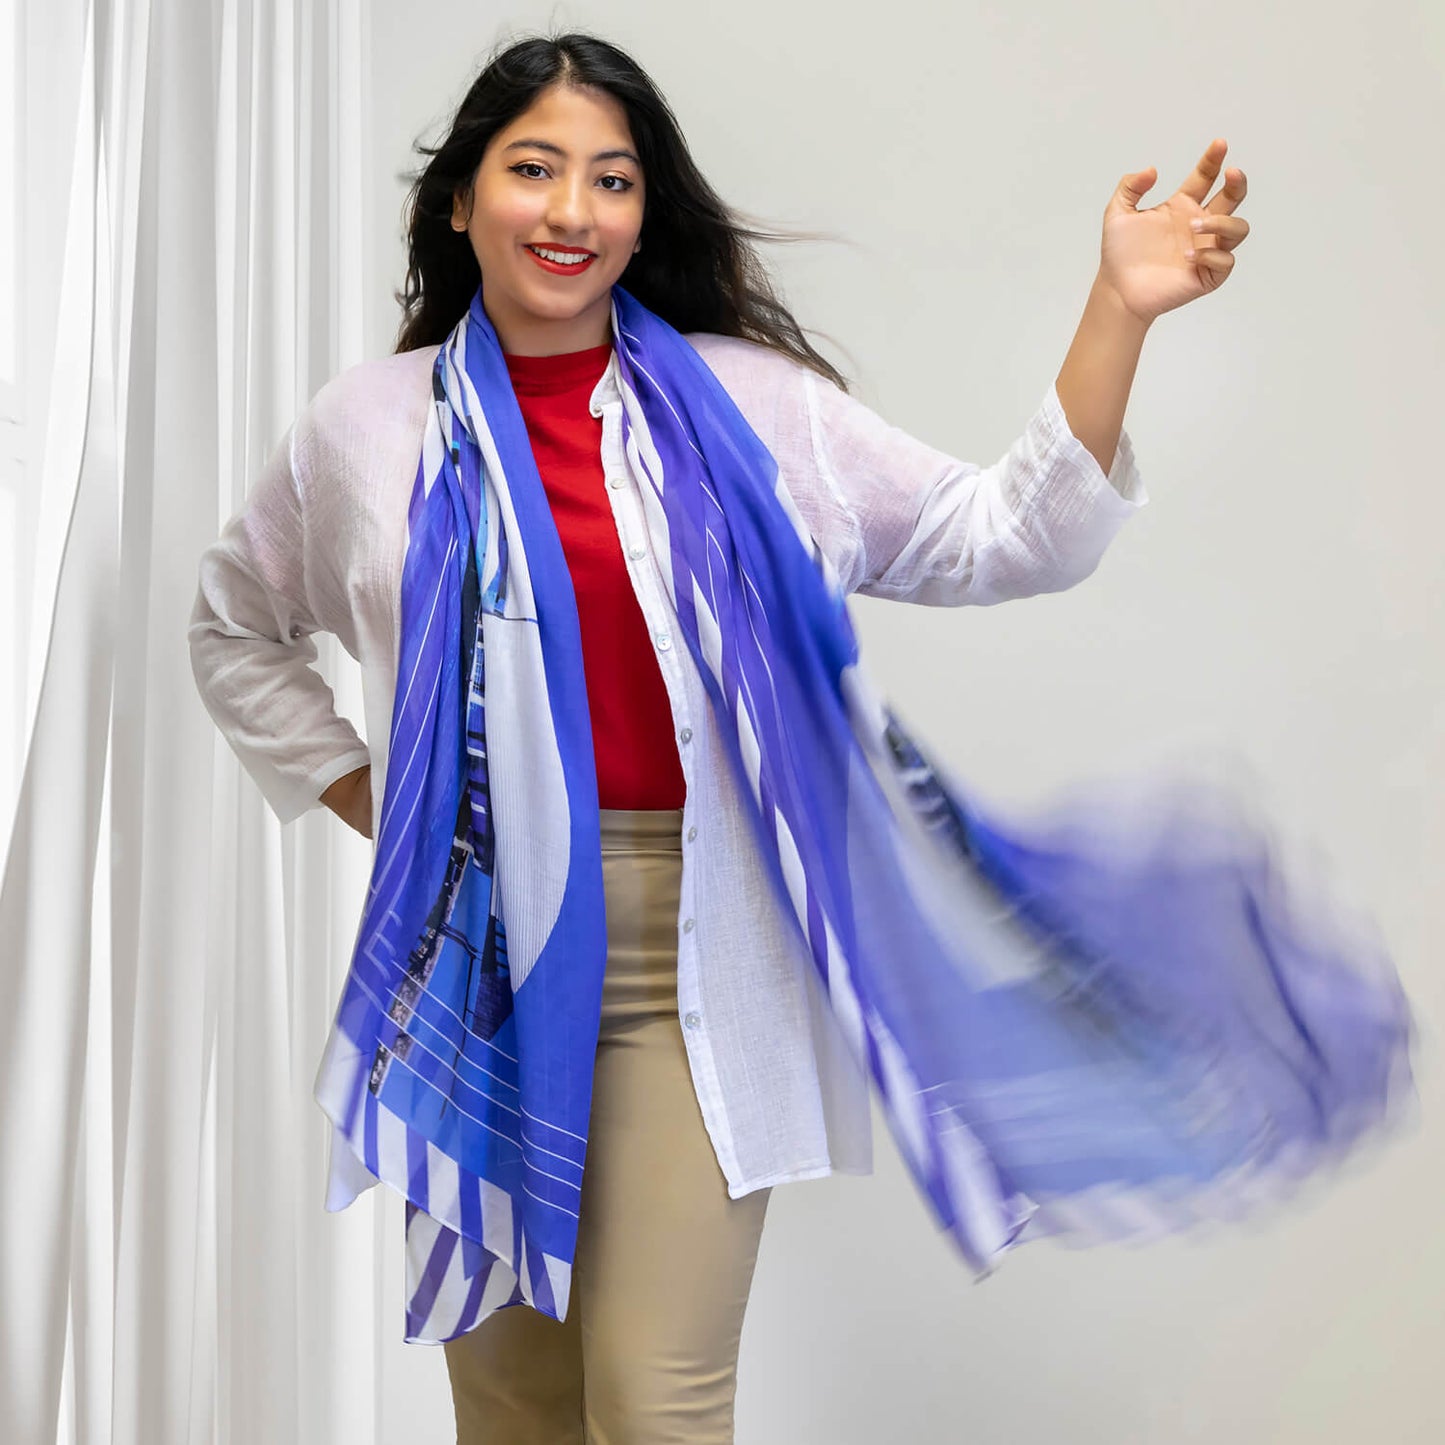 maritime blue and white scarf by seahorse silks worn with red top and white shirt